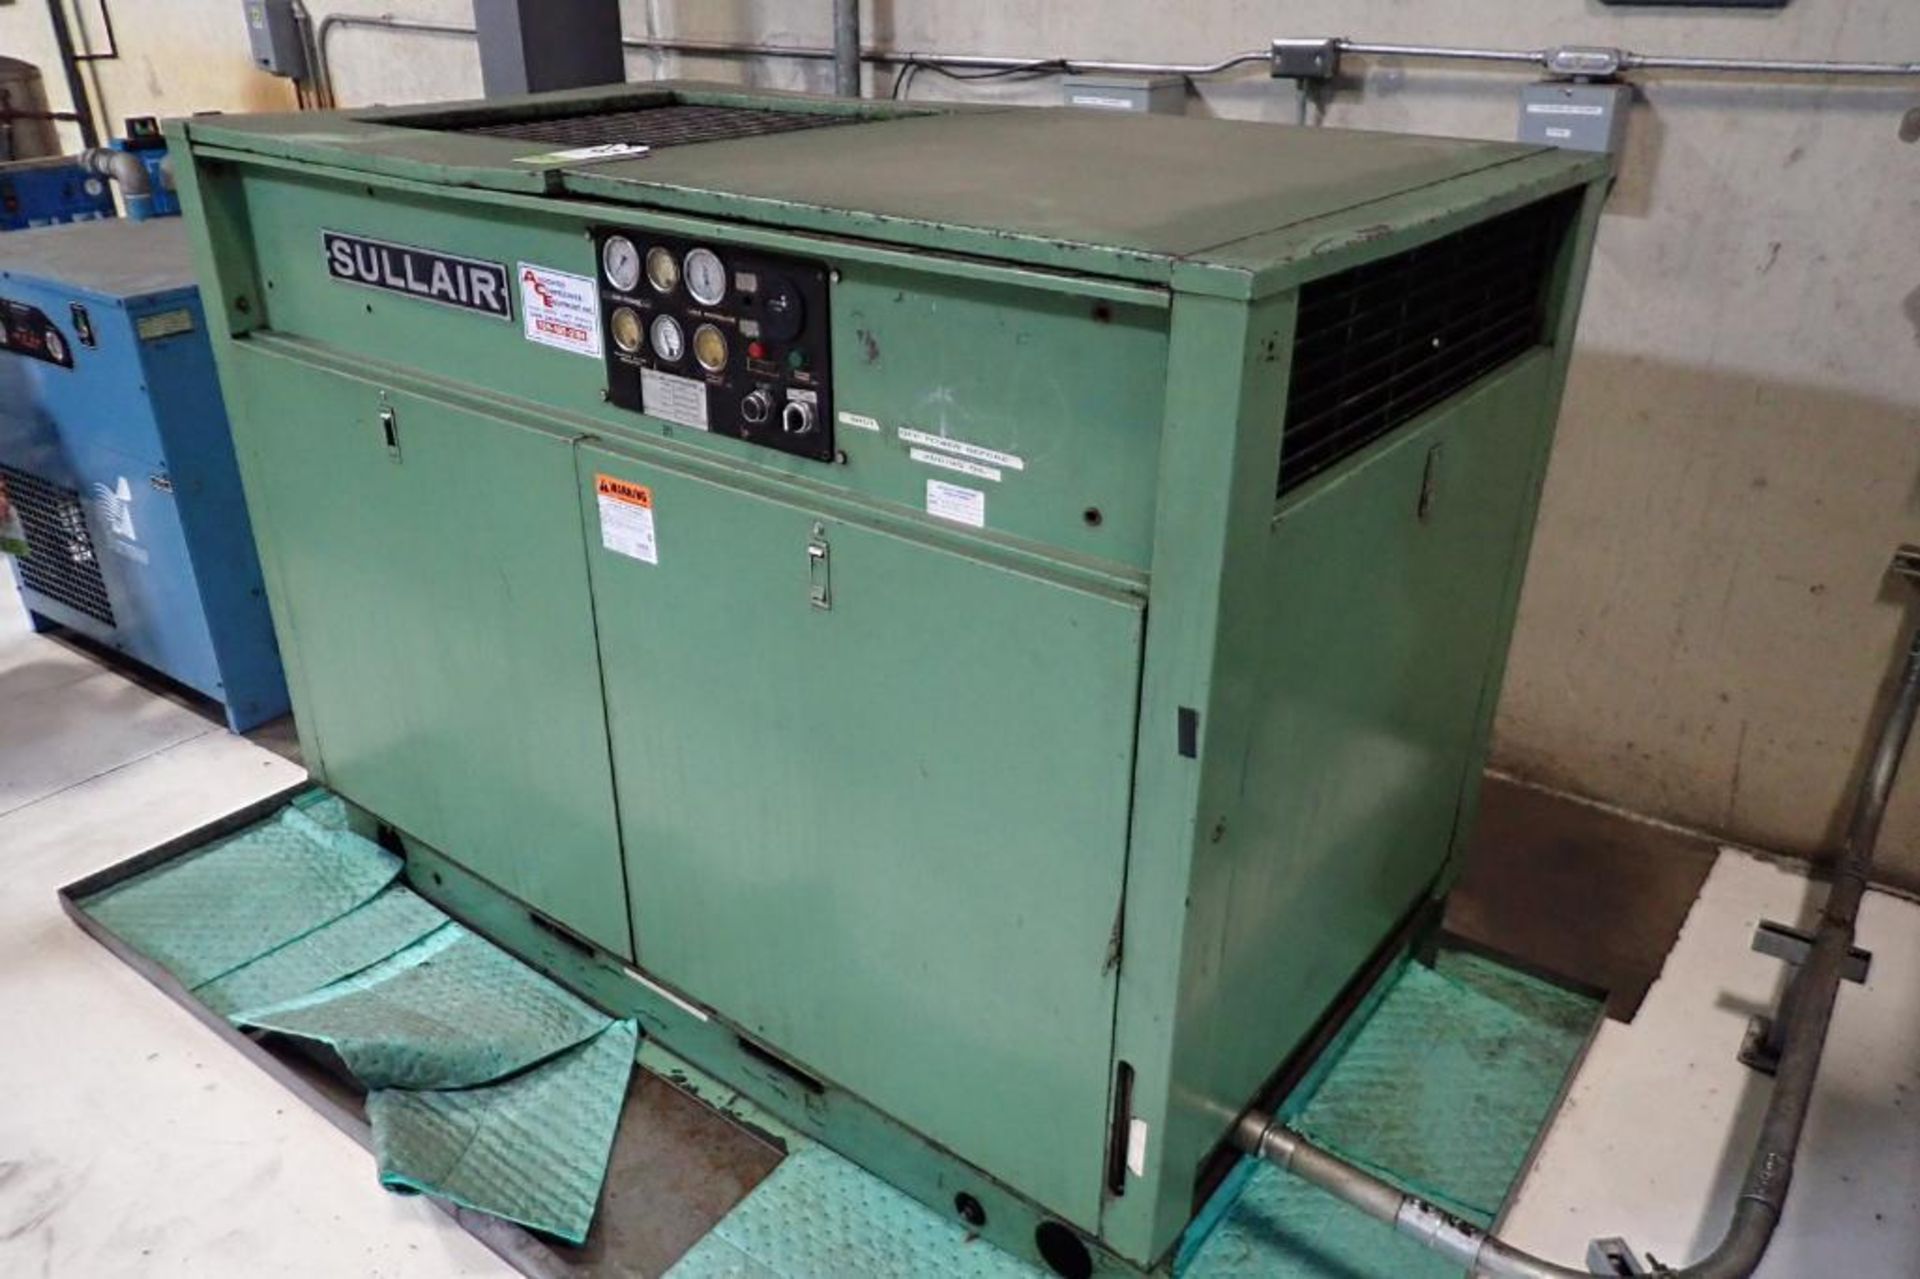 Sullair rotary screw air compressor, Model 12B-50H, SN 003-60825, 41,000 hours, rated max press. 115 - Image 2 of 8